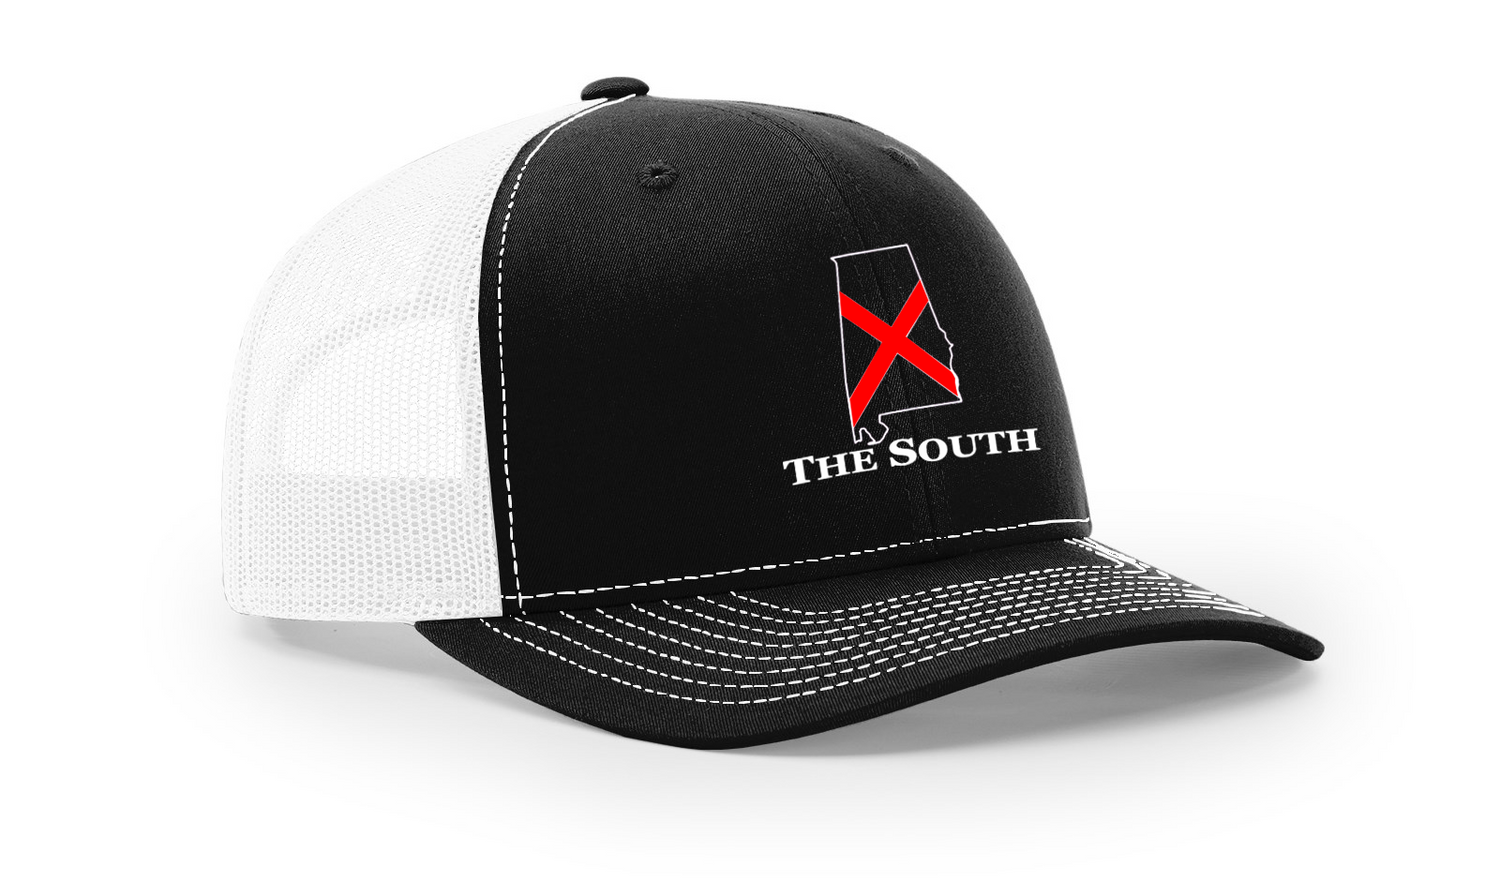 Black/White/RedX - The South